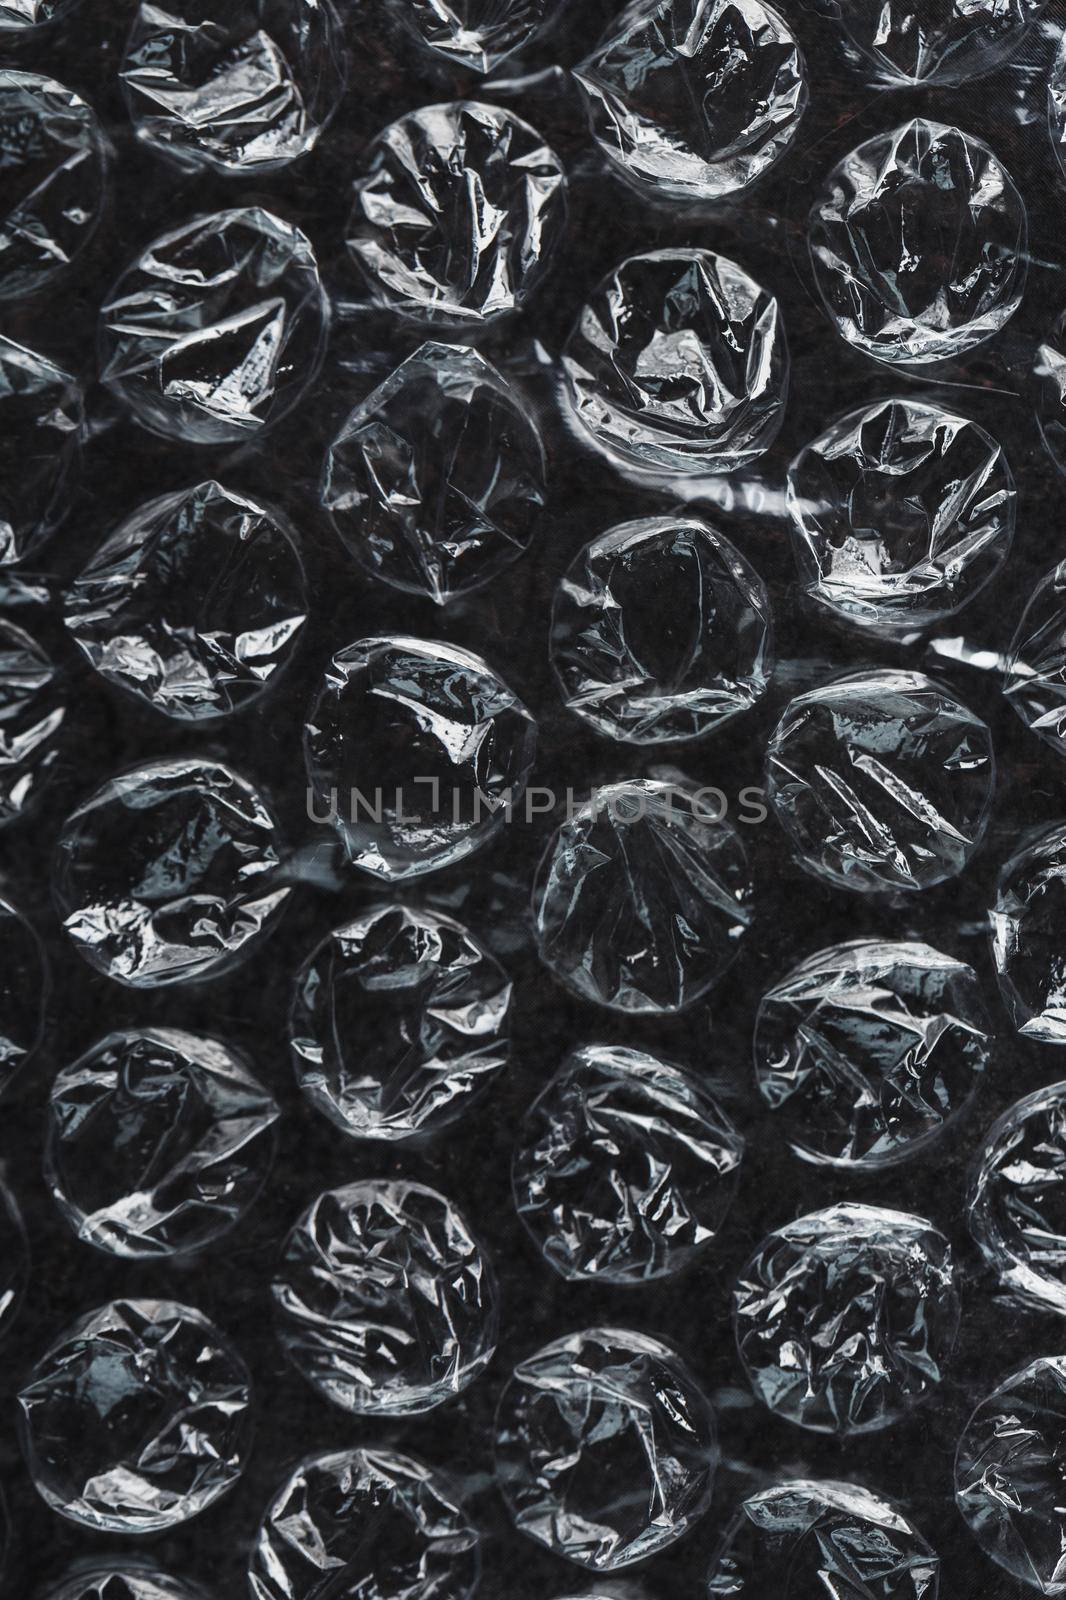 Packing bubble wrap for parcels on a Black background in full screen